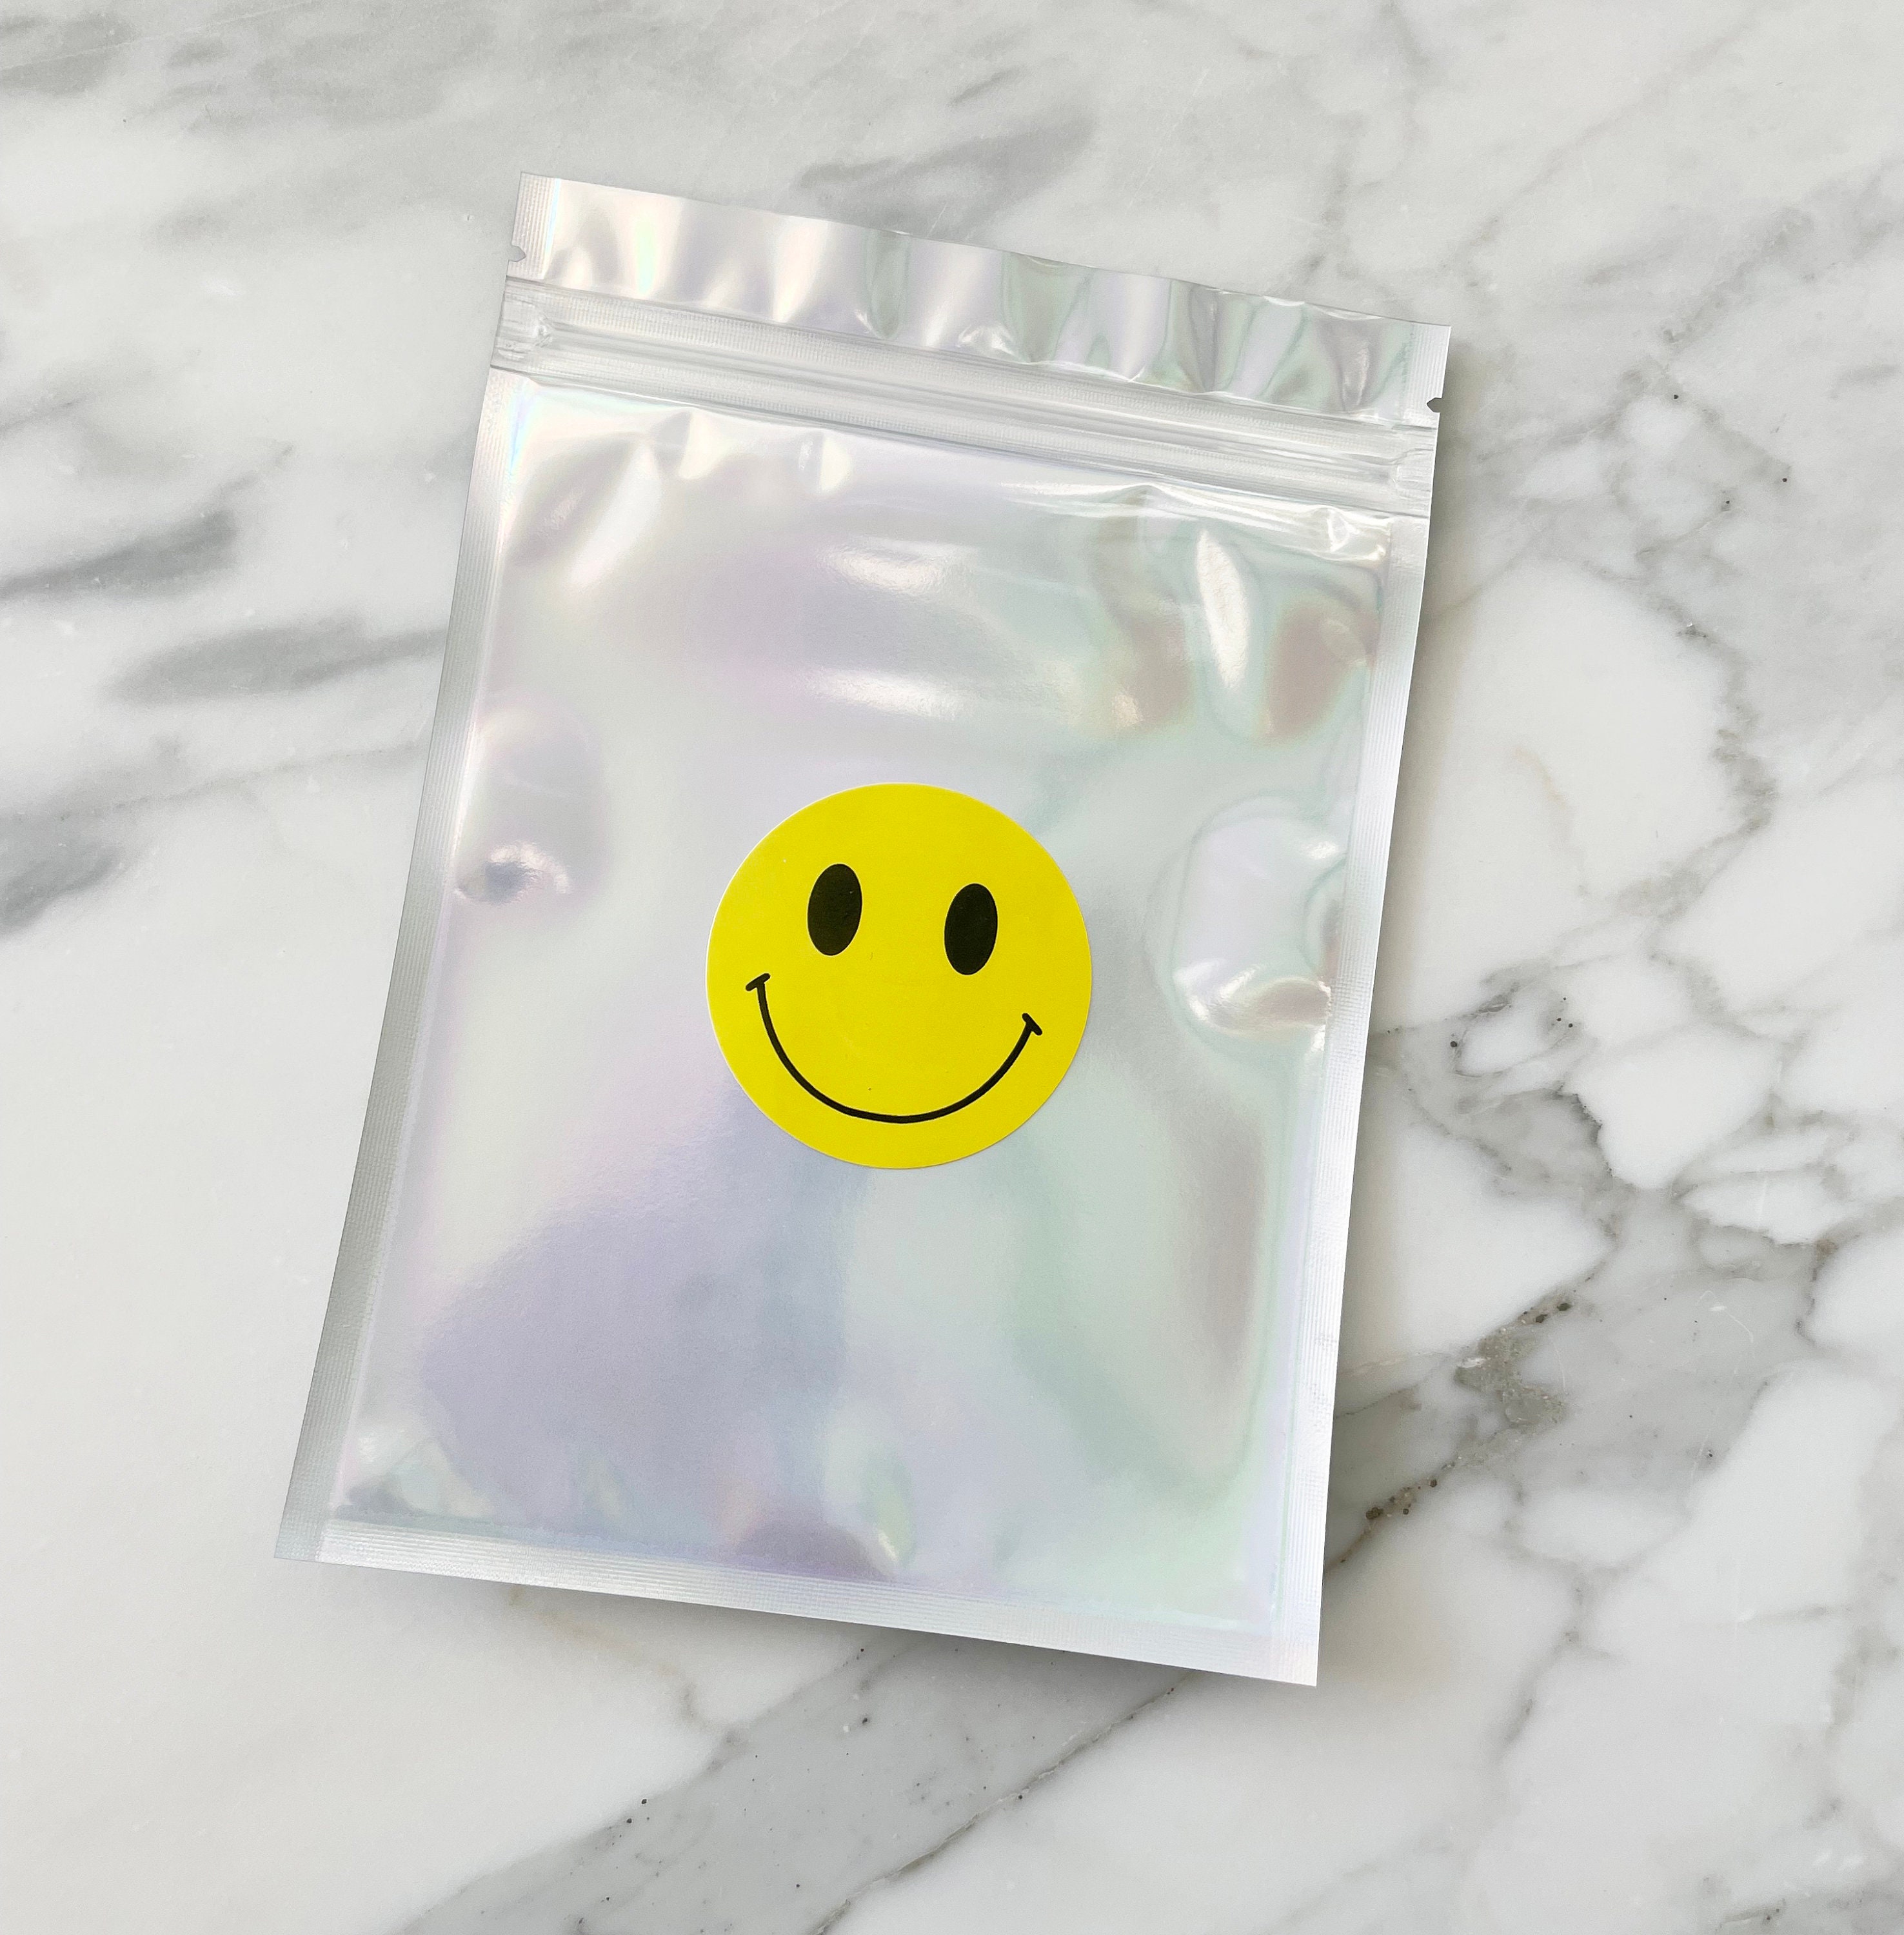 Smiley Face Treat Party Loot Bags 8 ct Red Yellow Metallic